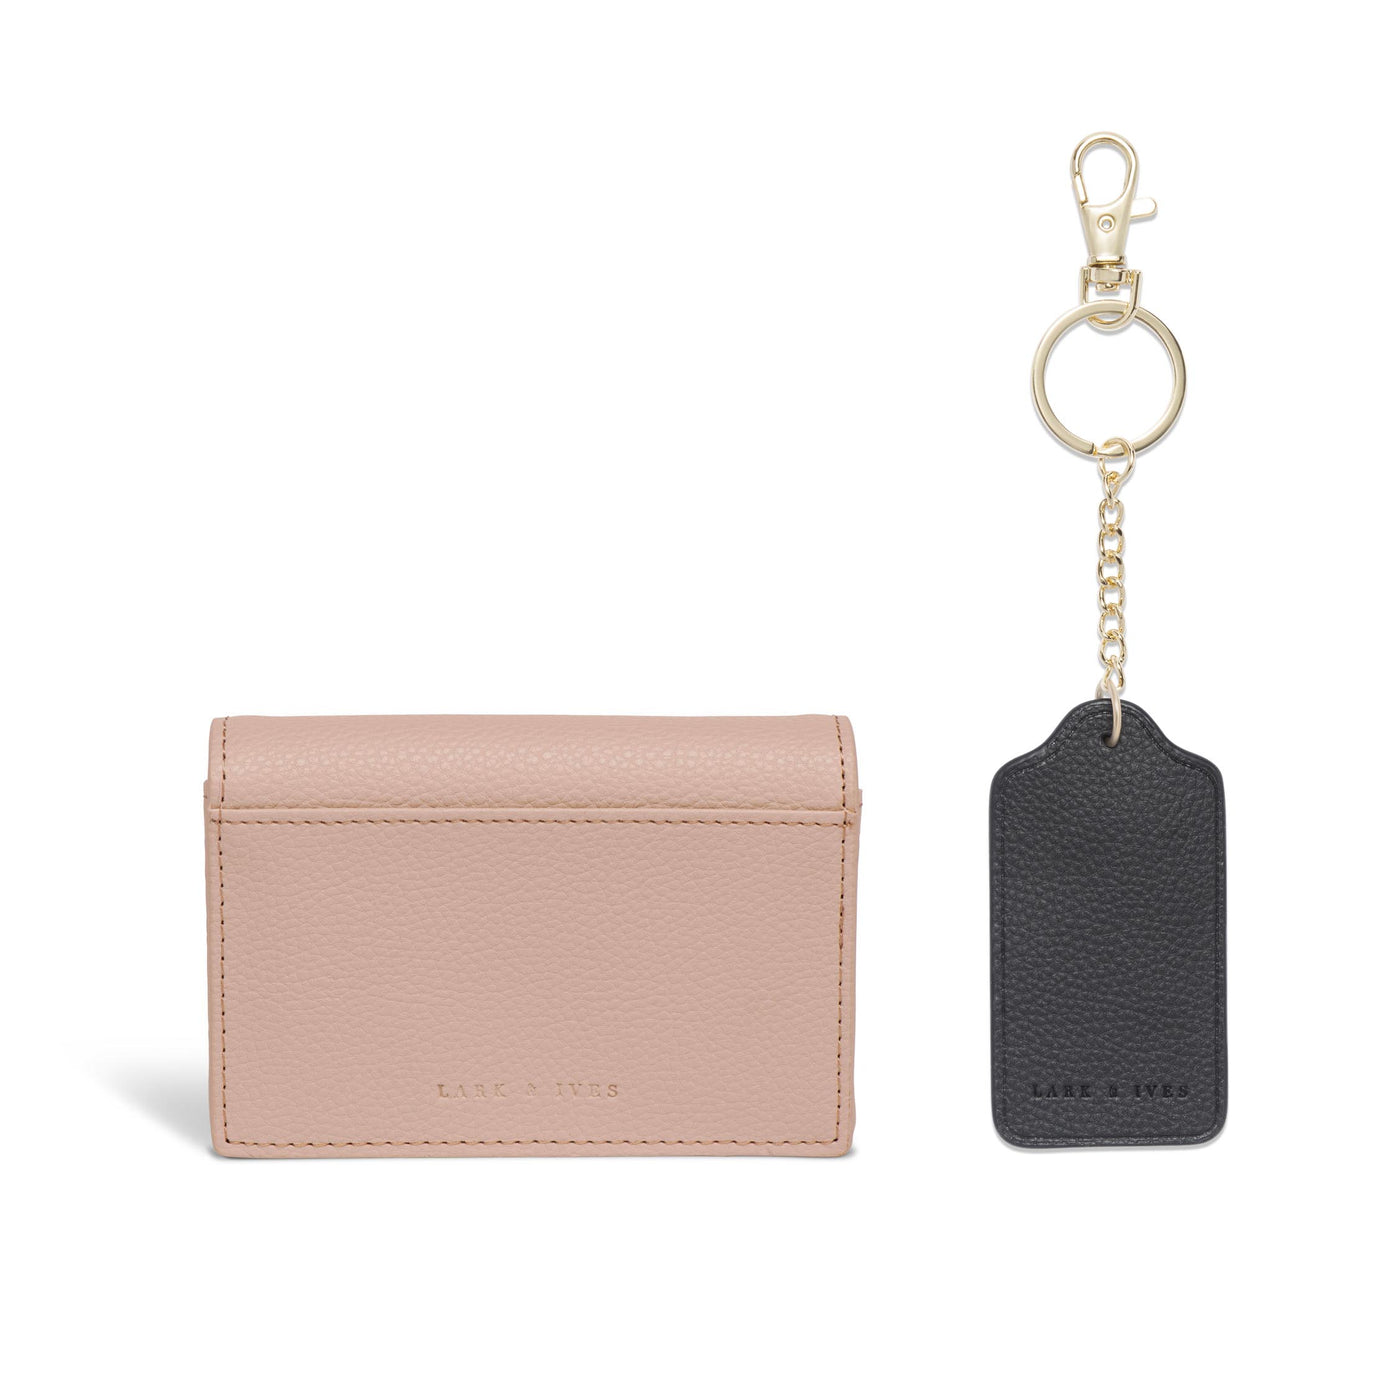 Lark and Ives / Vegan Leather Accessories / Small Accessories / Wallet / Mini Wallet / Card Case / Card Holder / Button snap closure / Fold Wallet / Tag Keychain / Keychain / Key Holder / Nude Pink Case and Black Keychain